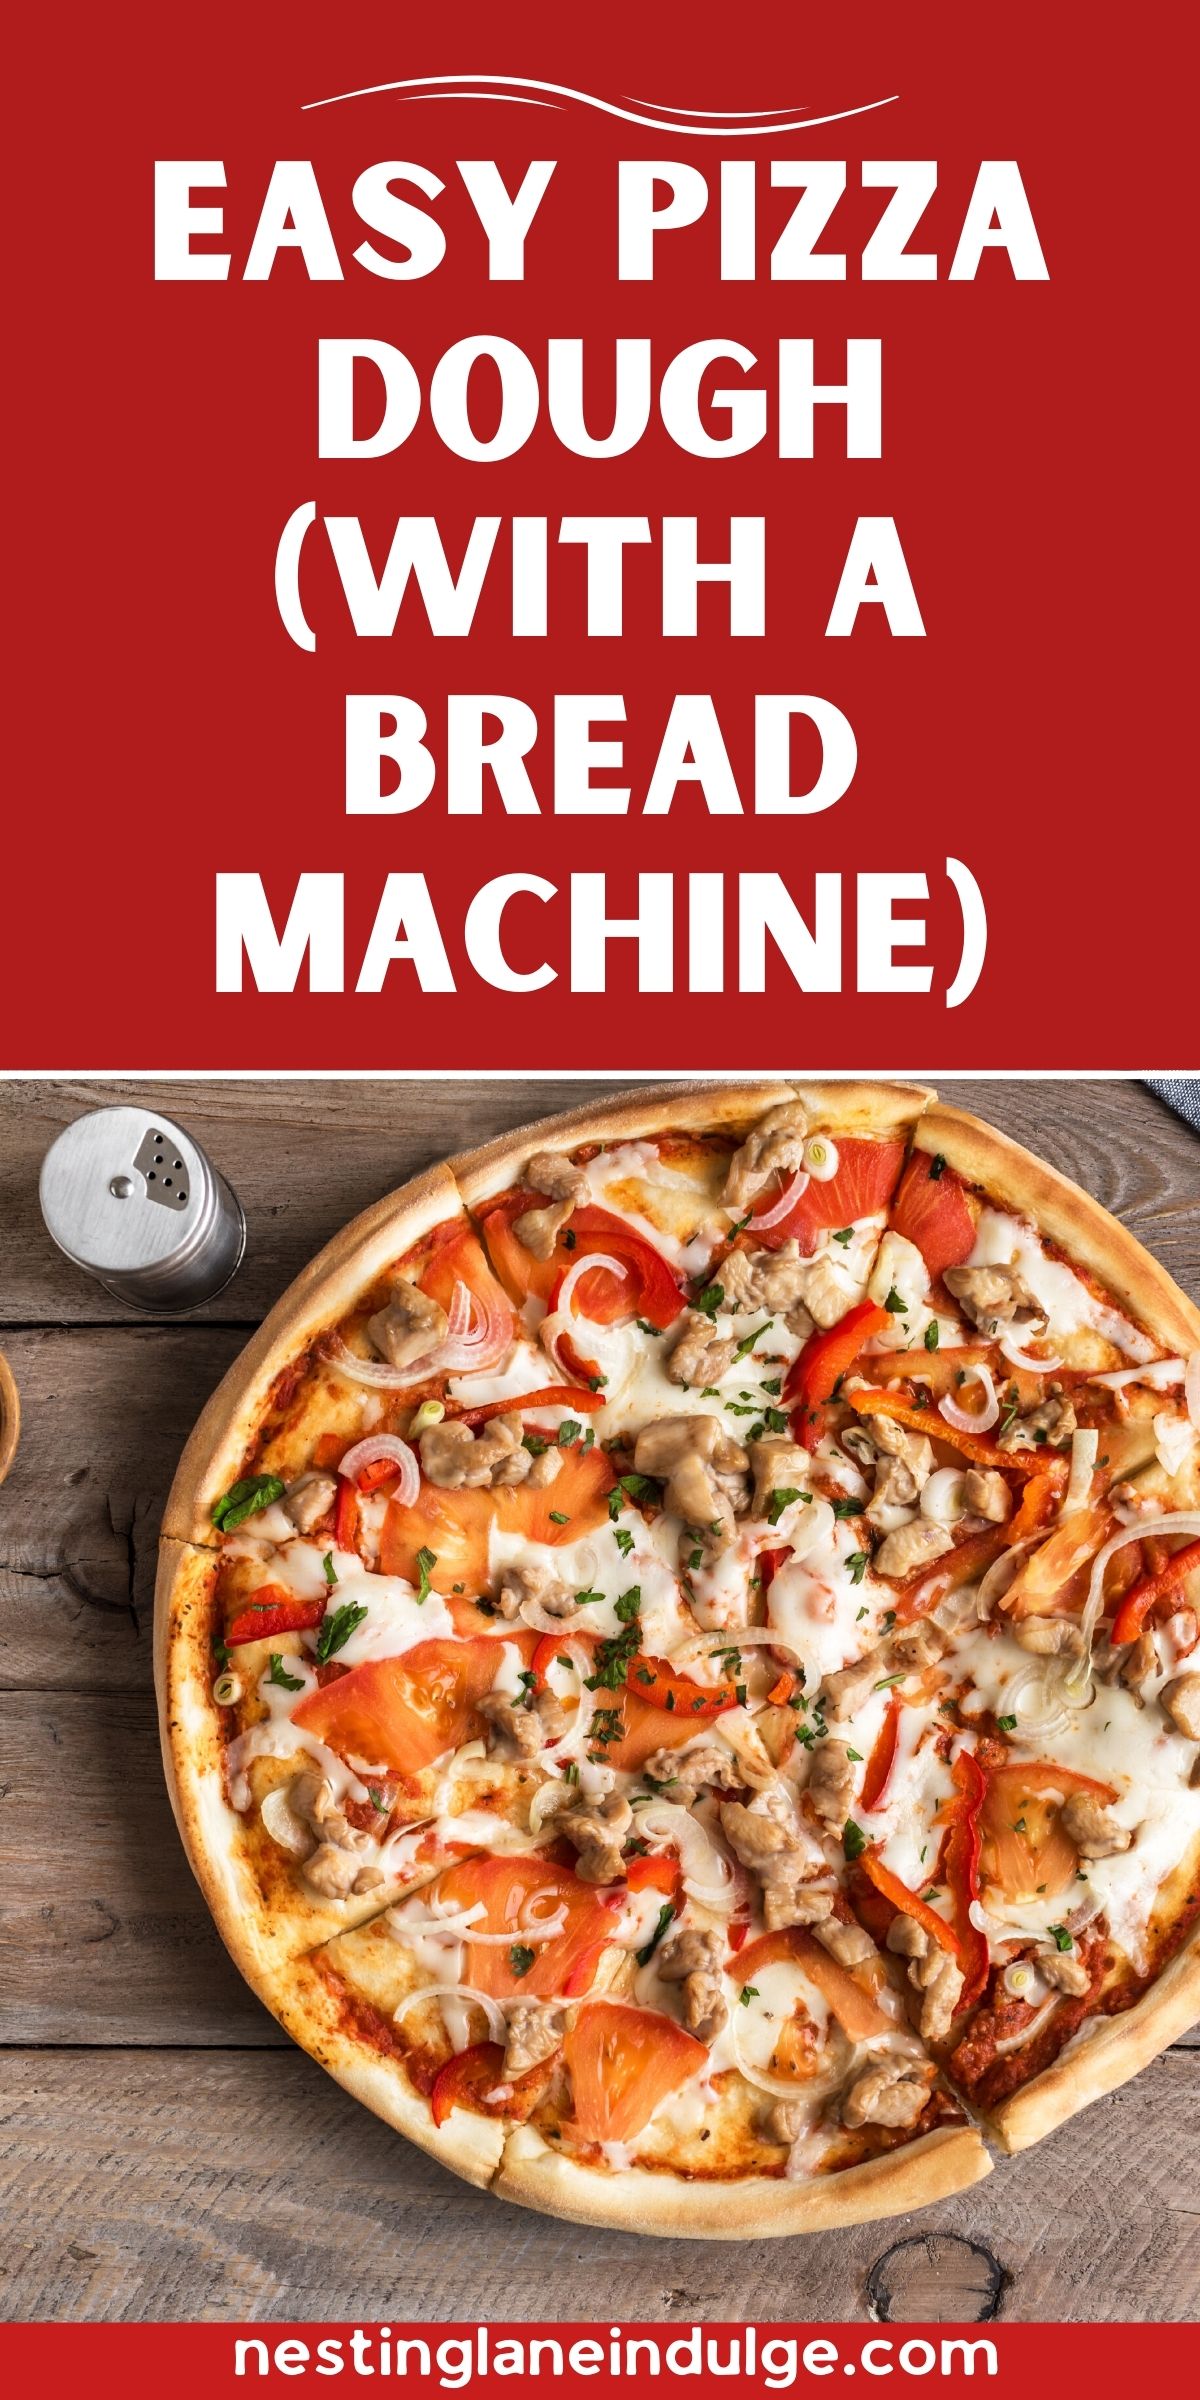 Graphic for Pinterest of Easy Pizza Dough (with Bread Machine) Recipe.